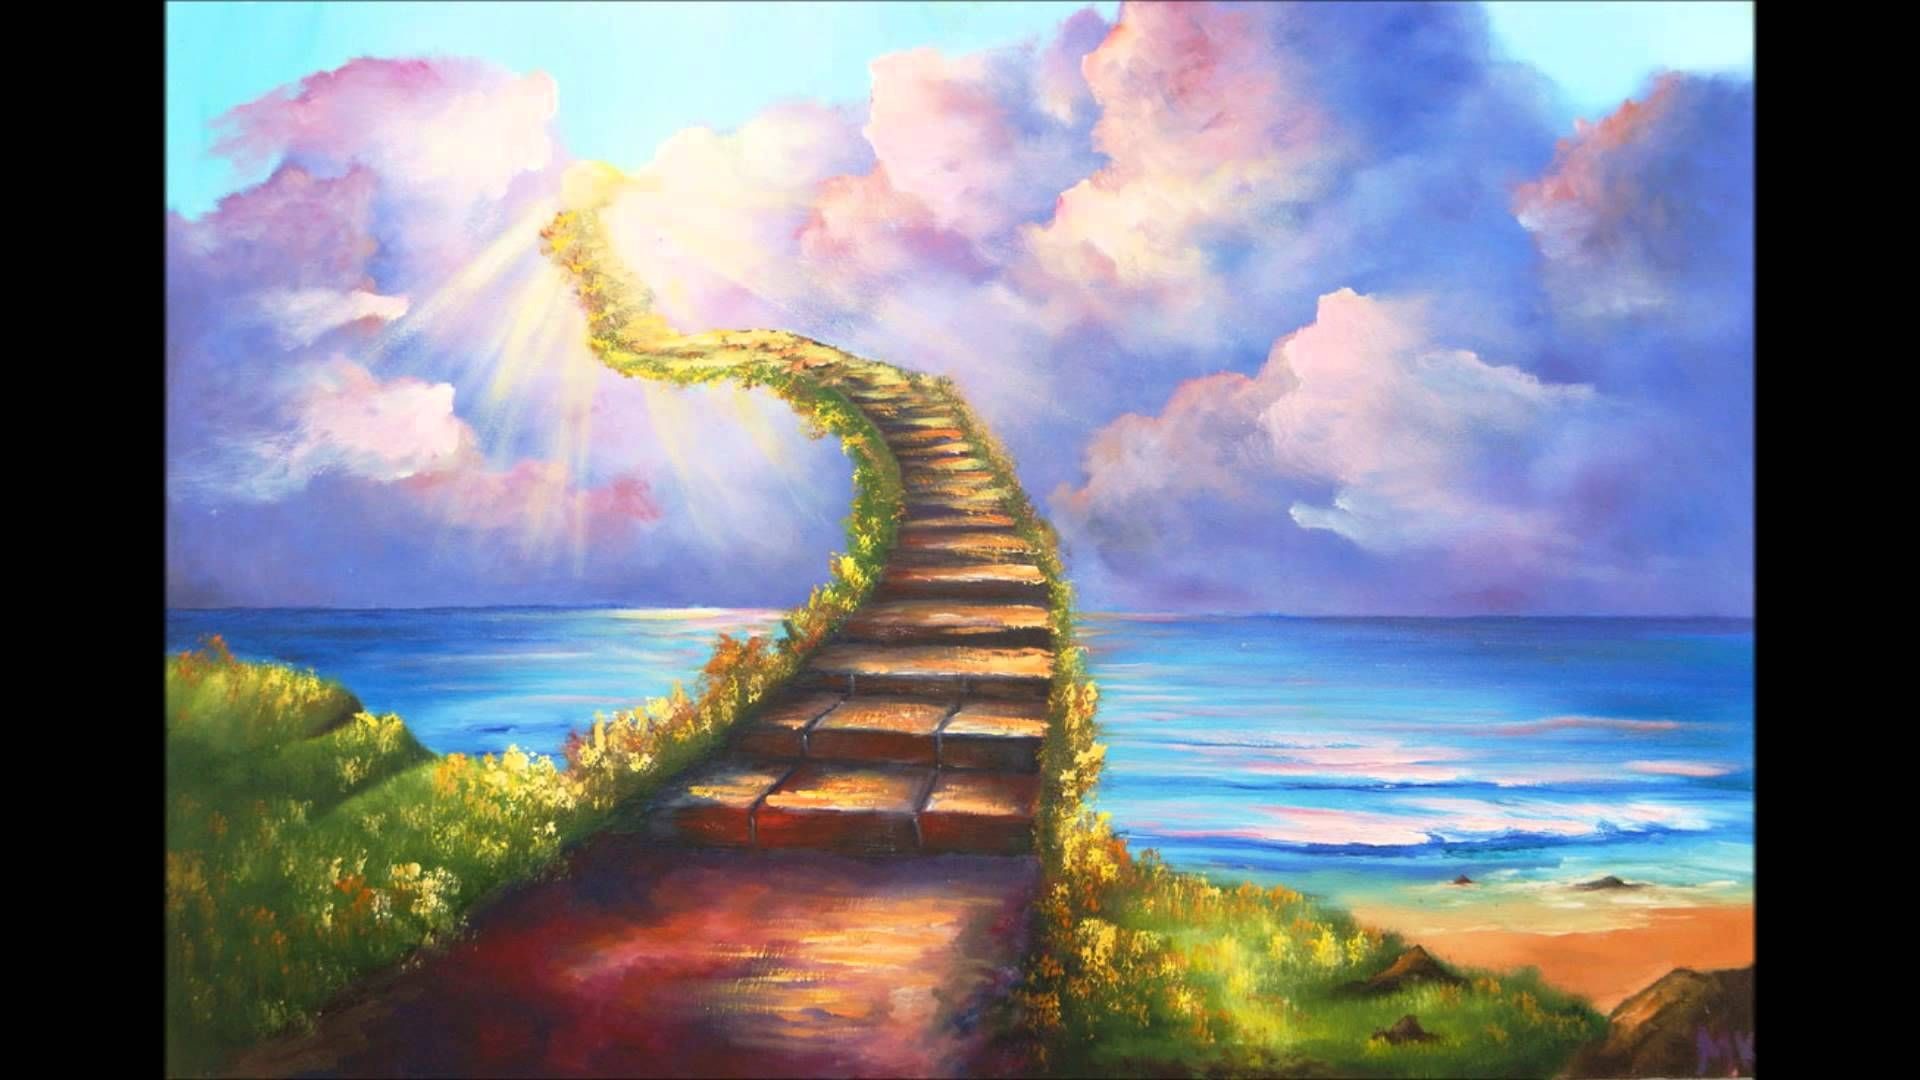 1920x1080 Led Zeppelin - Stairway to heaven (Stereo Sound)